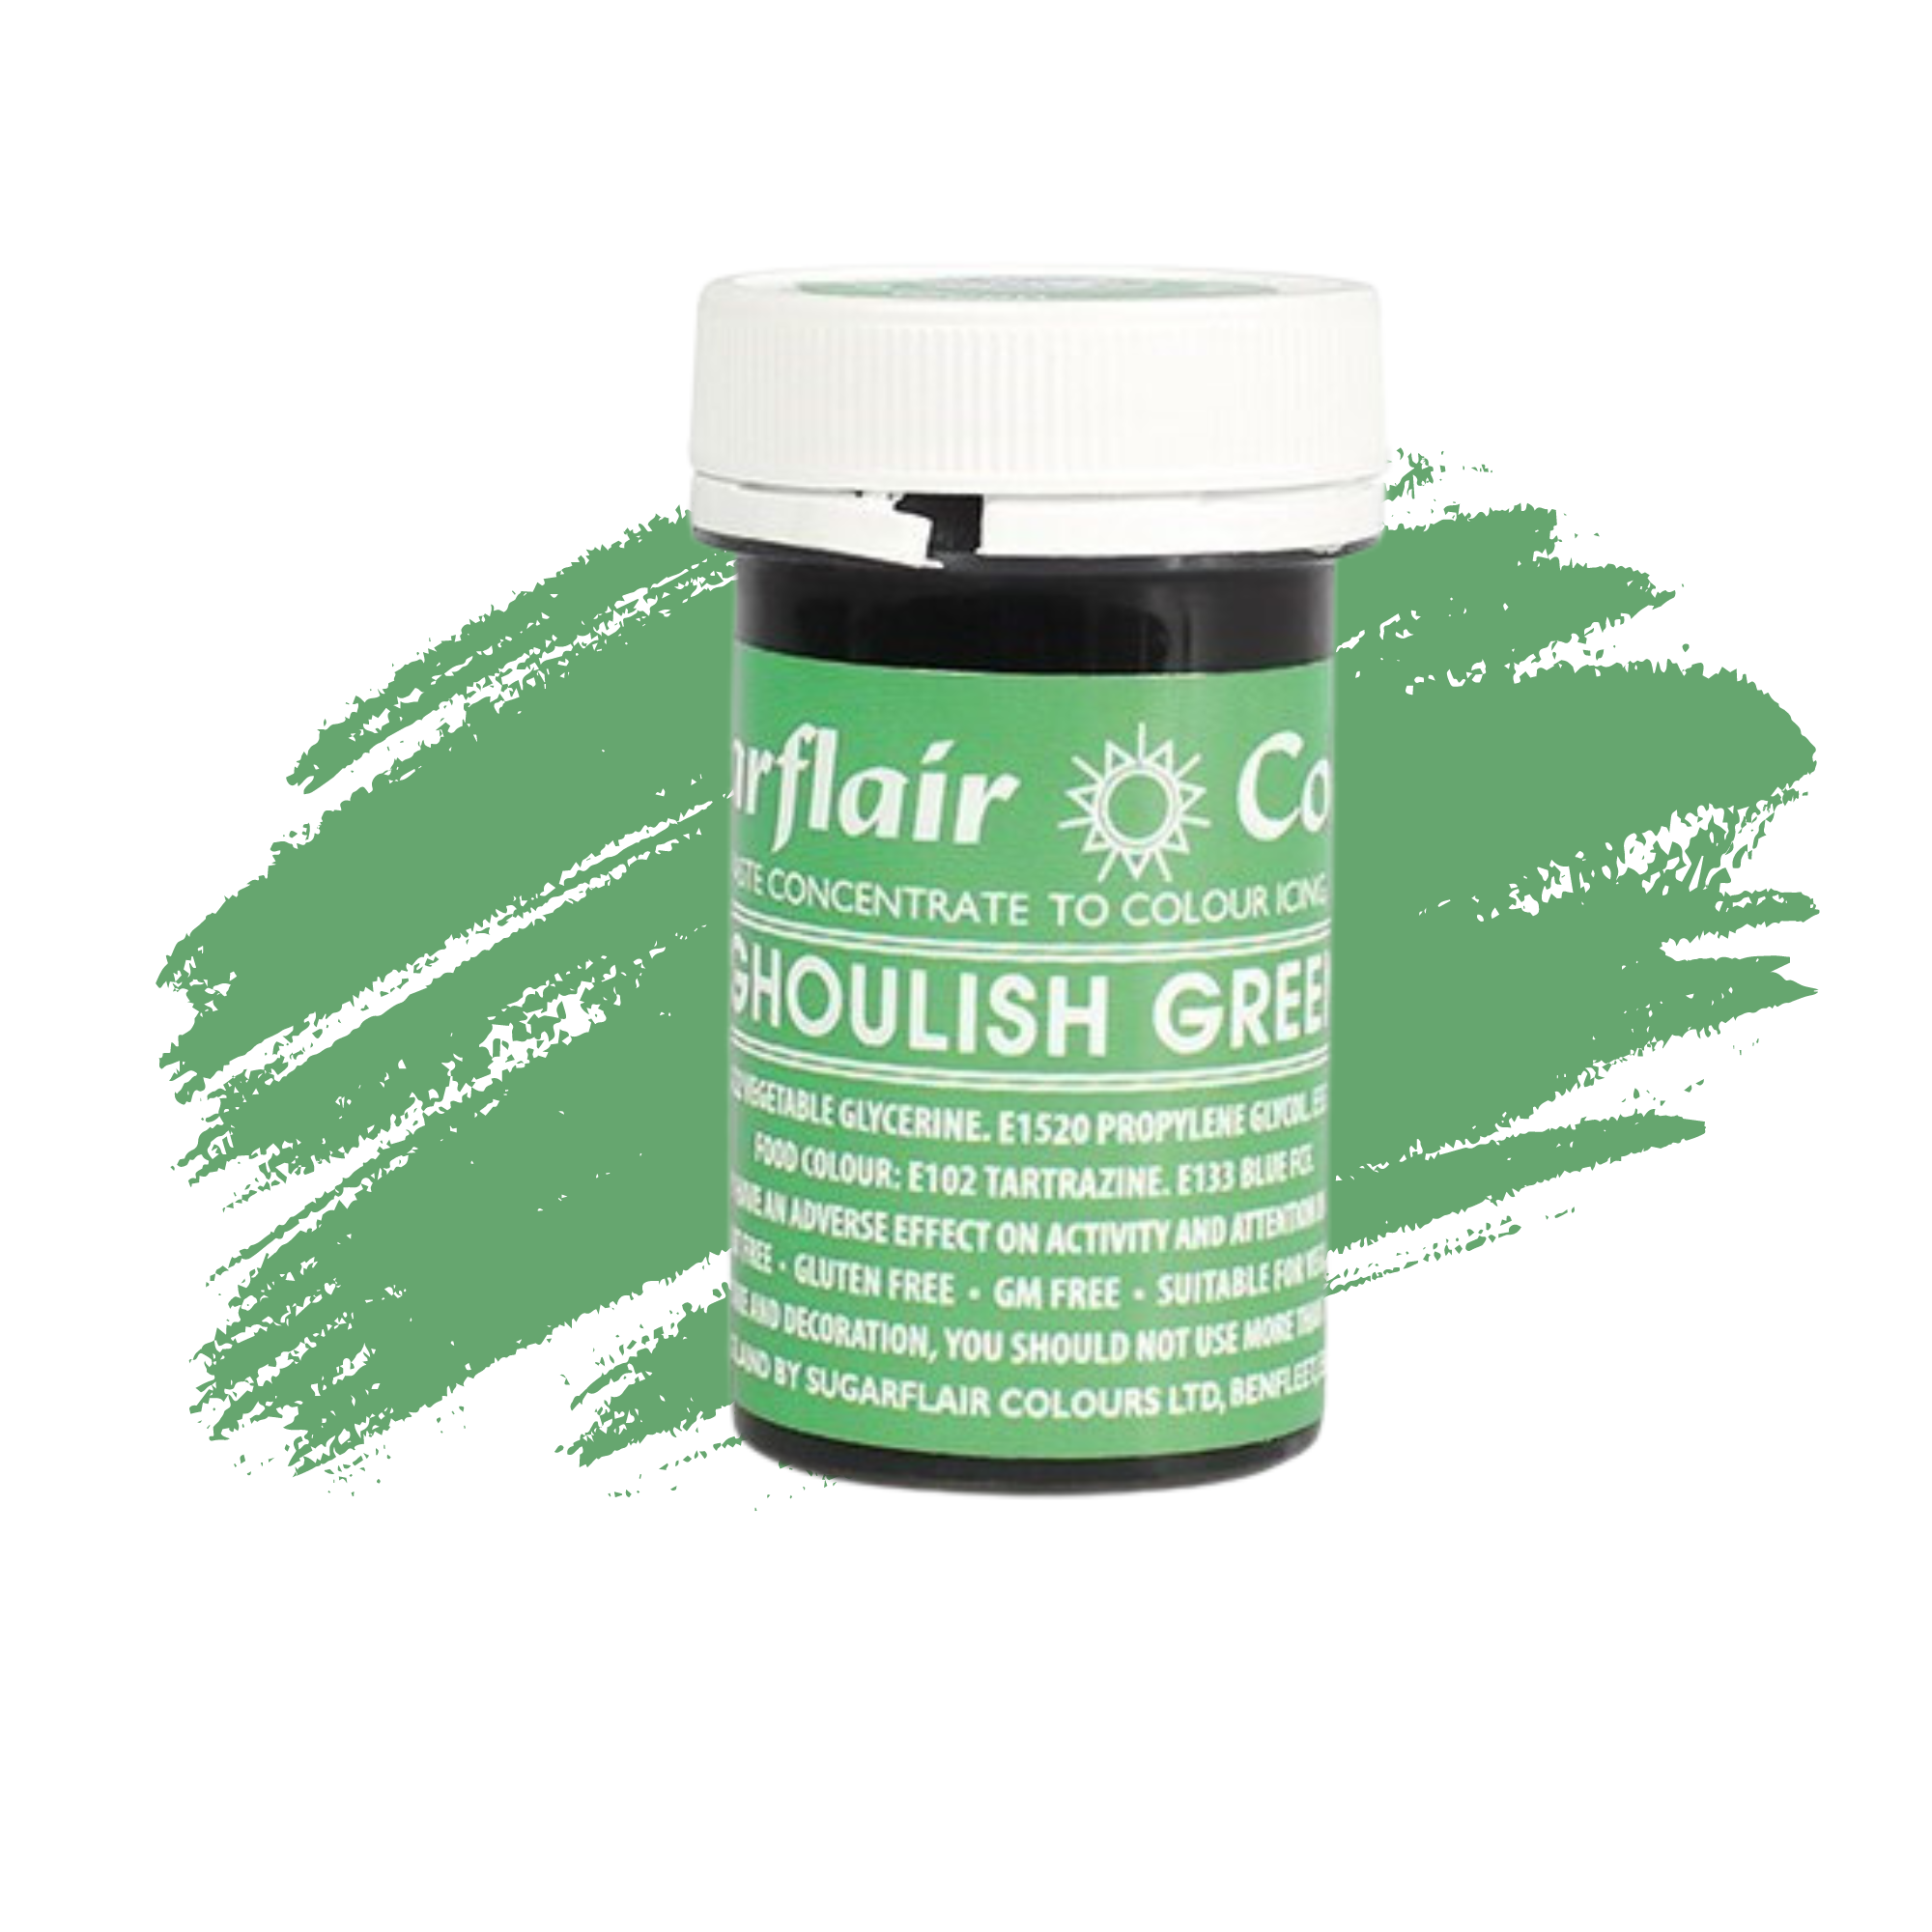 Sugarflair Paste Colours Concentrated Food Colouring - Spectral Ghoulish Green - 25g